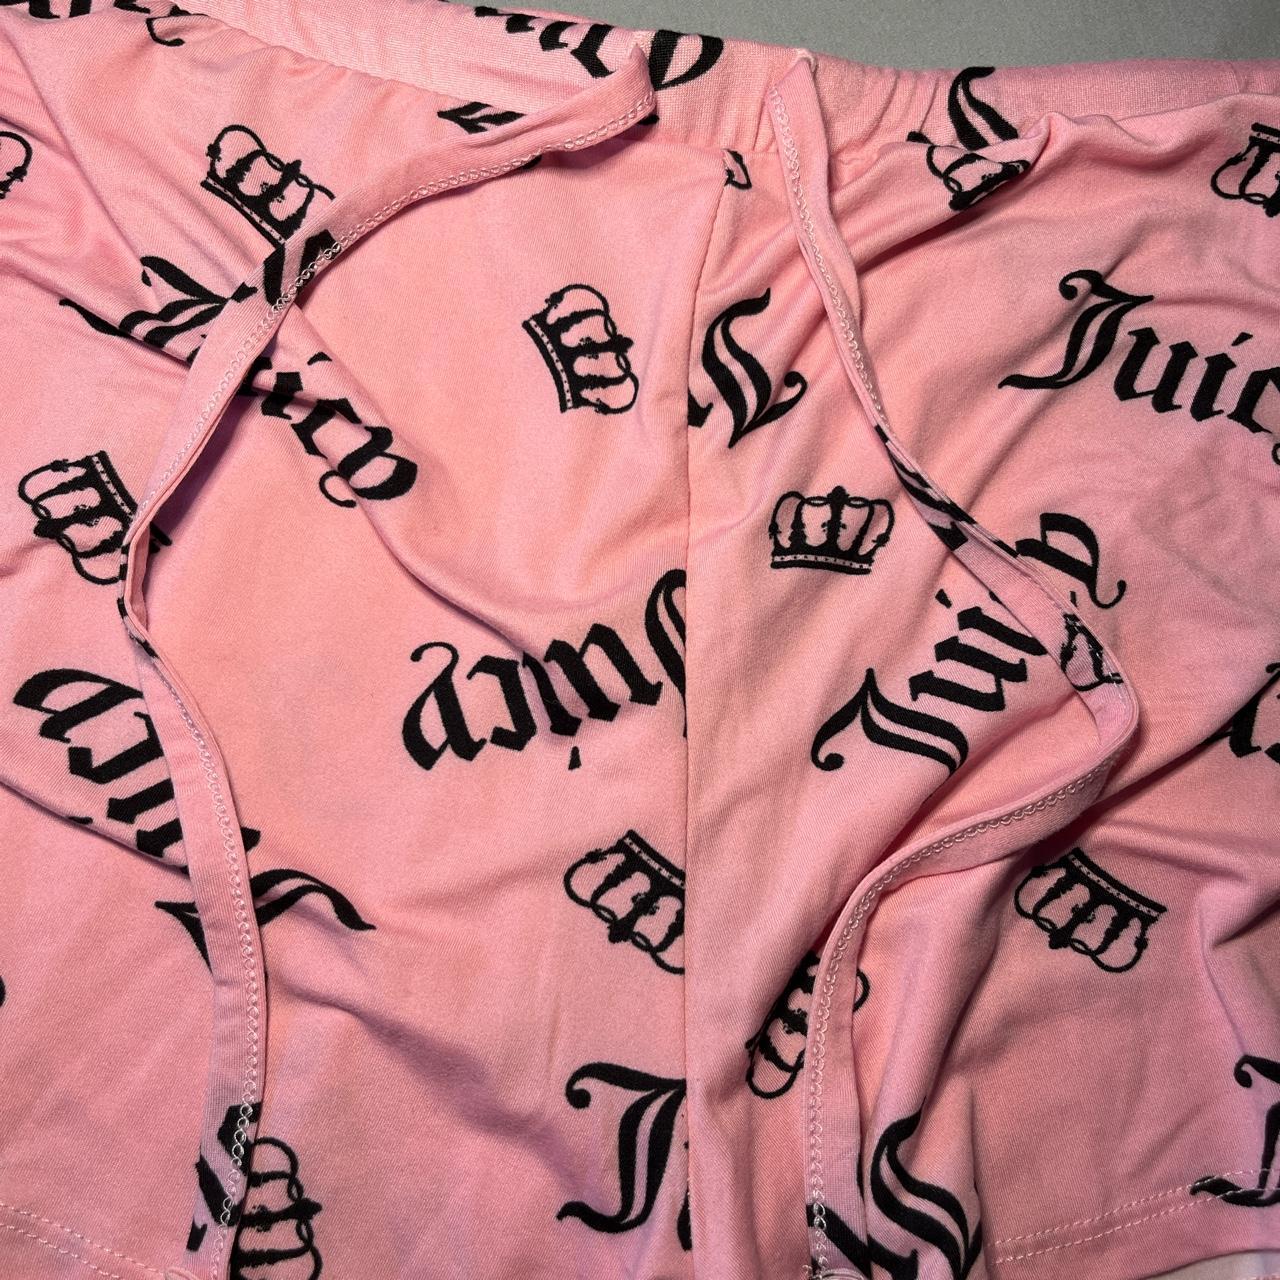 Juicy Couture Women's Pink and Black Shorts | Depop